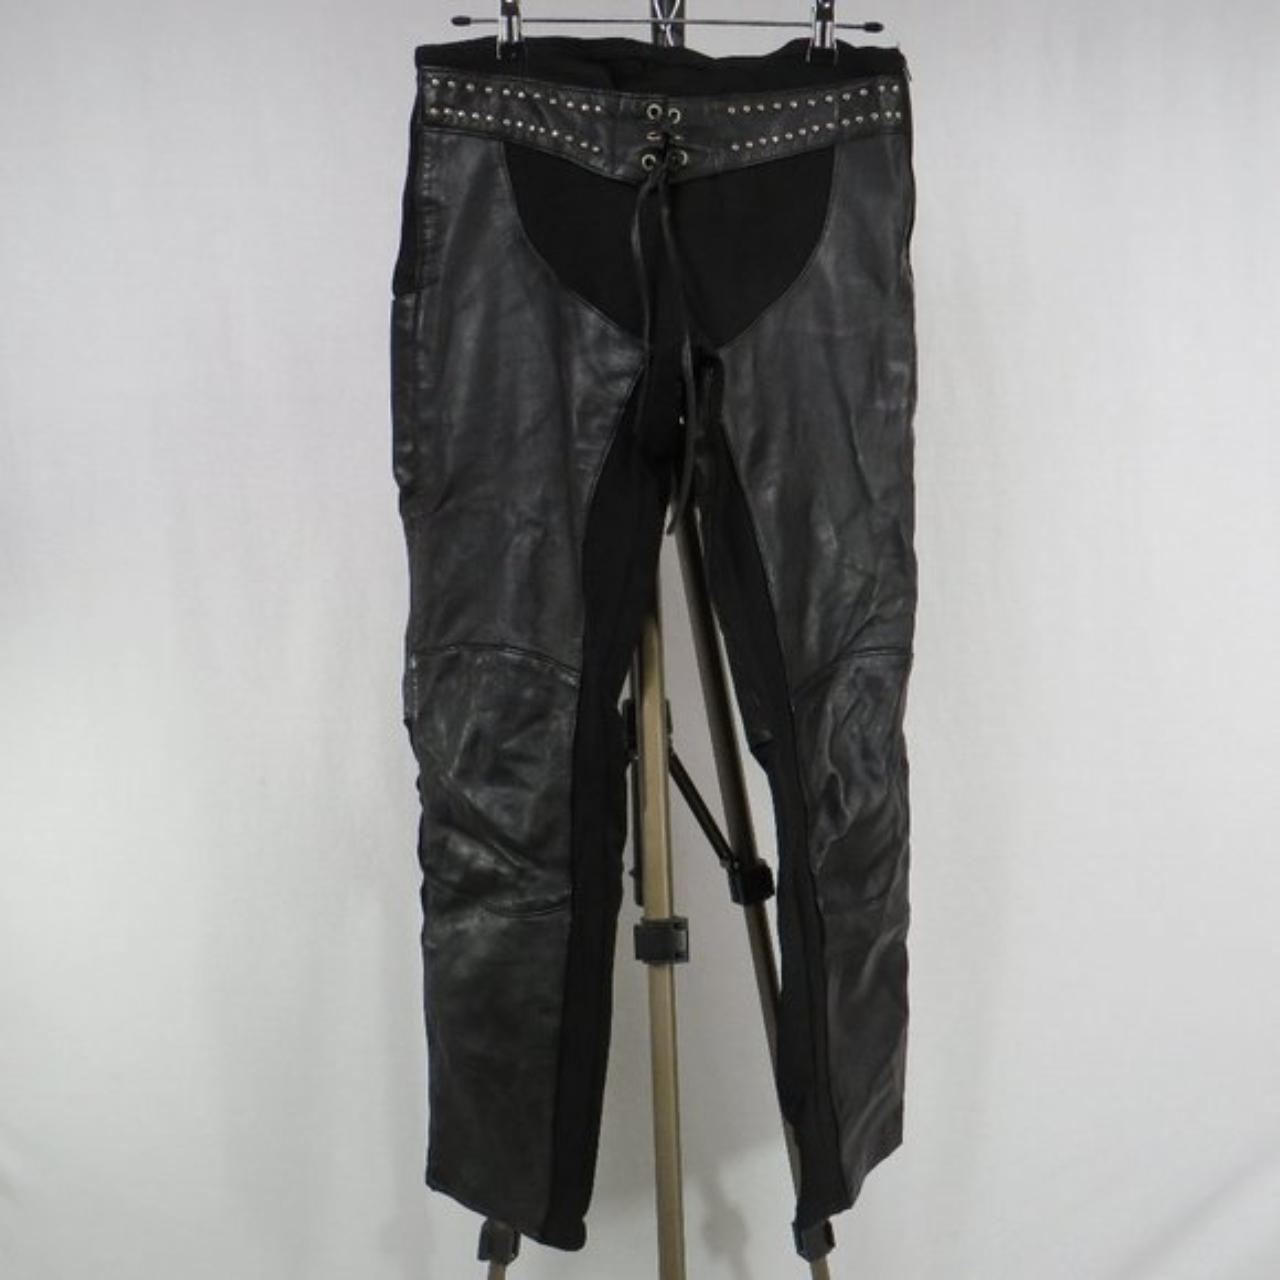 Black Leather Custom Made Pants With Stretchy Panels Depop